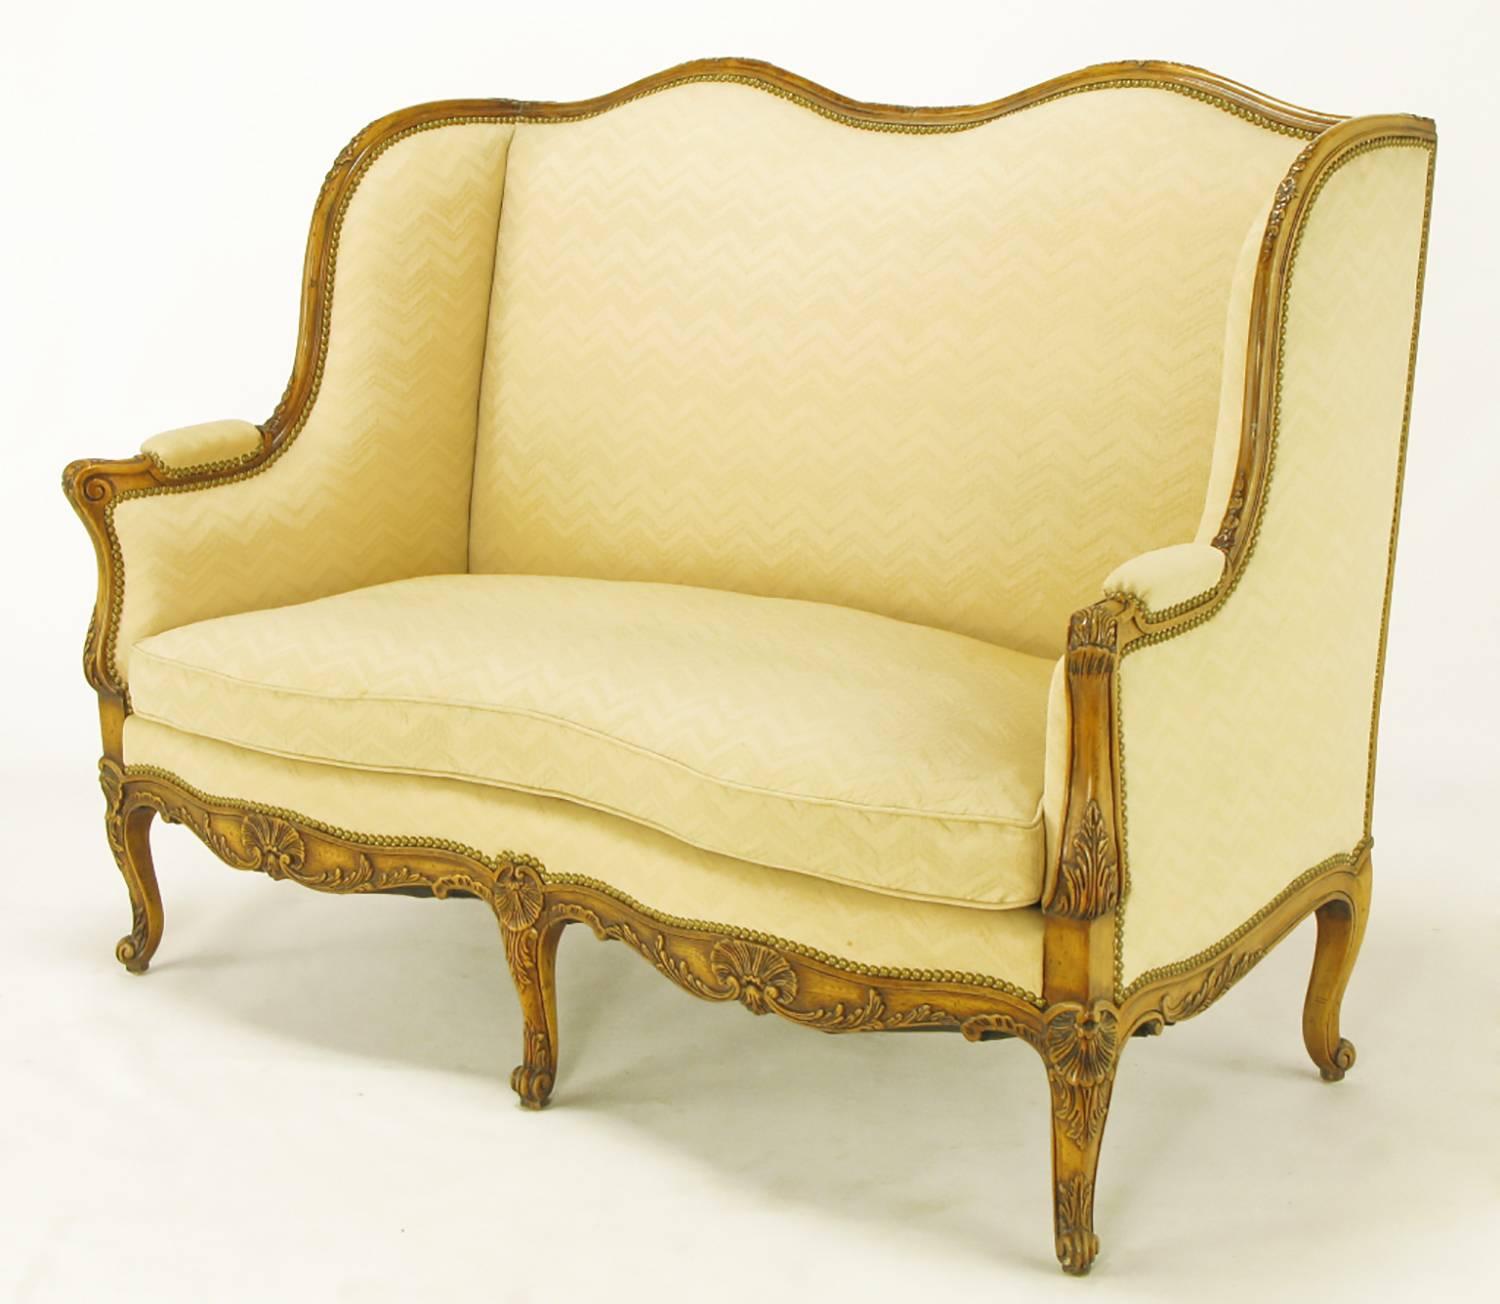 A finely crafted reproduction of an 18th century French settee, this lovely piece features an intricately carved walnut wood frame. Acanthus leaf decoration adorns the wooden arms and cabriole legs, with carved sea shells and scroll feet adding